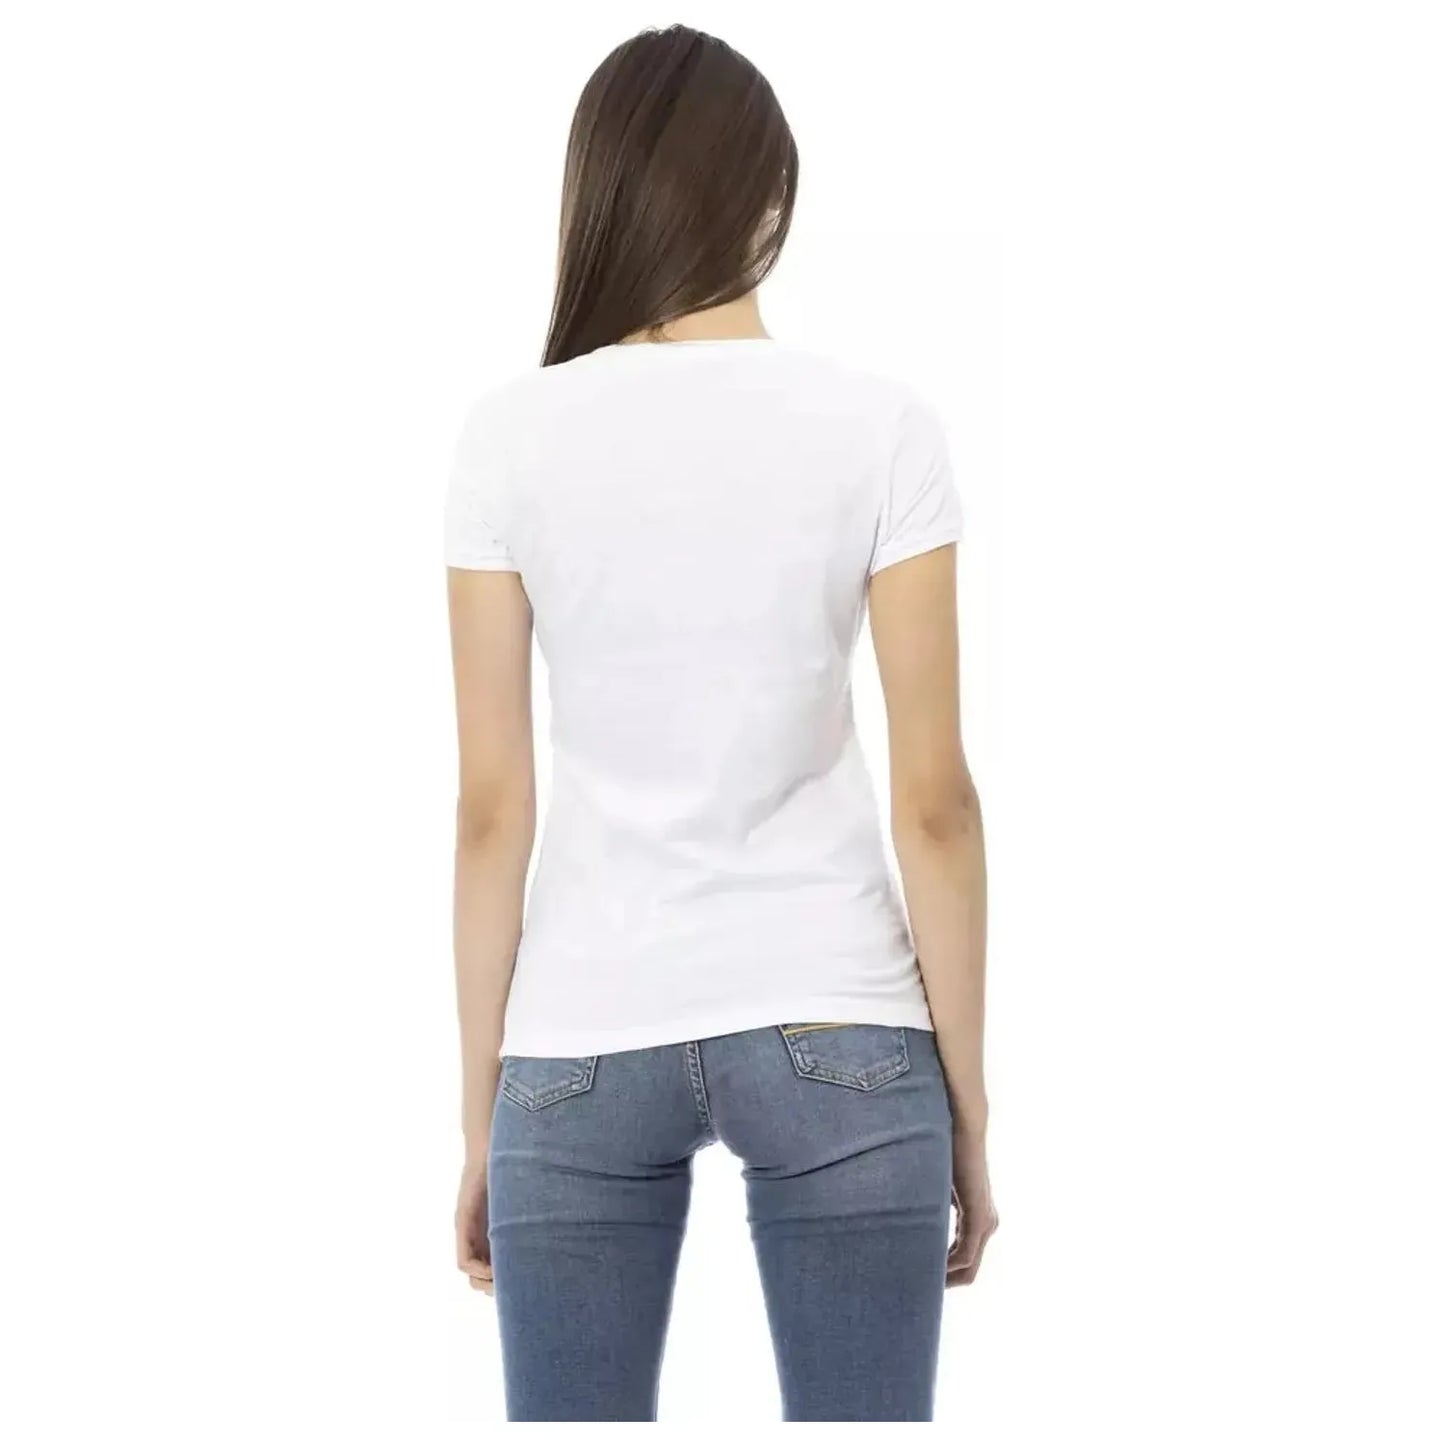 Trussardi Action Chic V-Neck Tee with Graphic Elegance white-cotton-tops-t-shirt-88